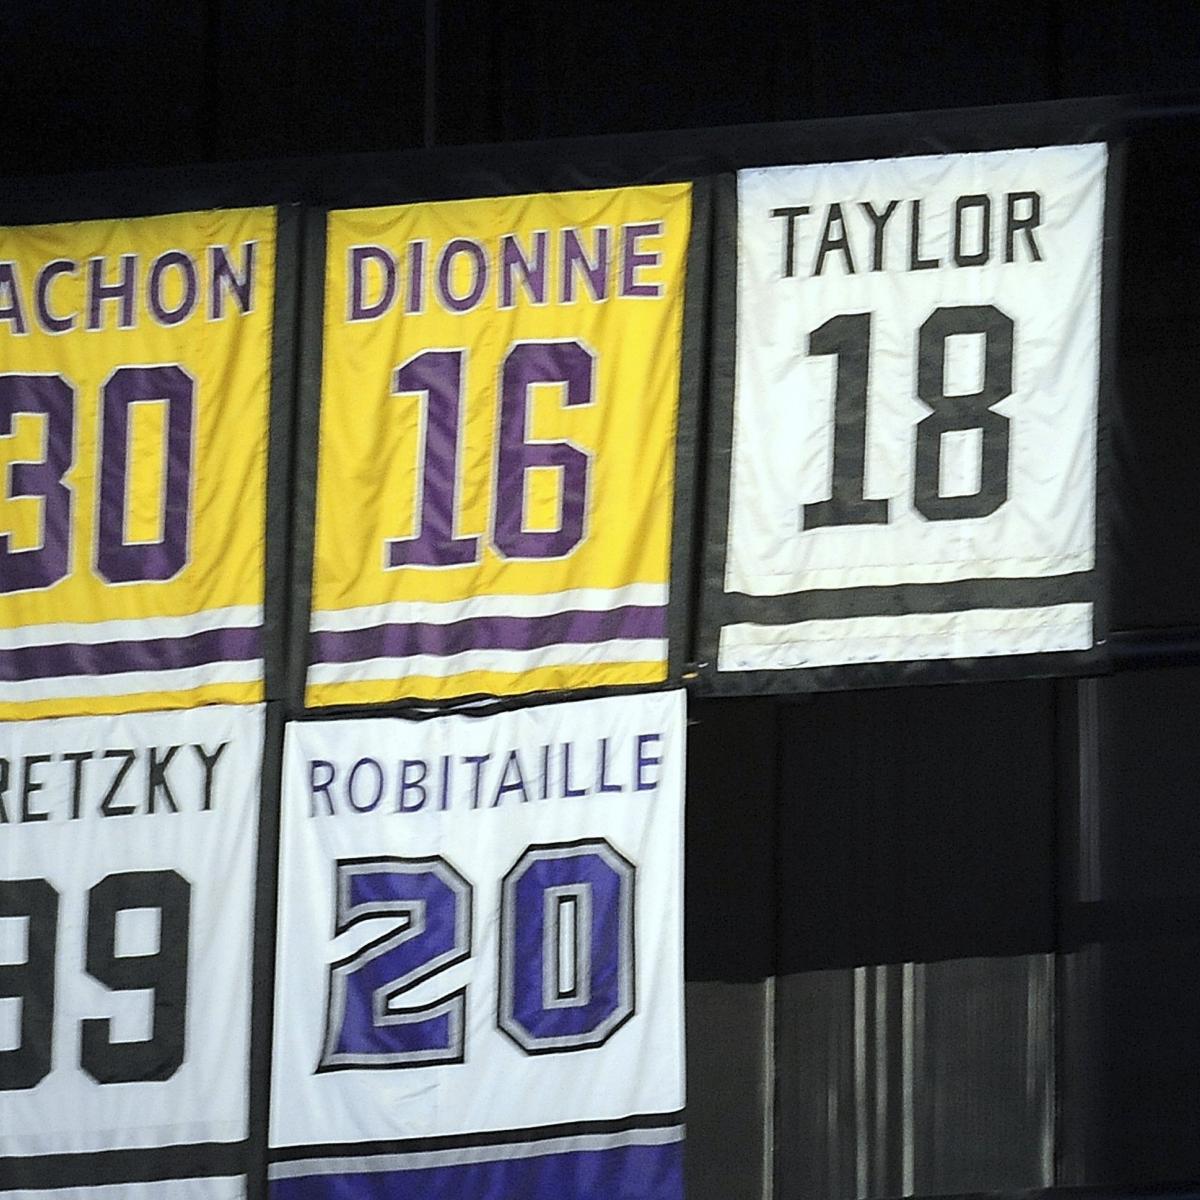 Nashville Predators: These Jerseys Have a Chance to be Retired One